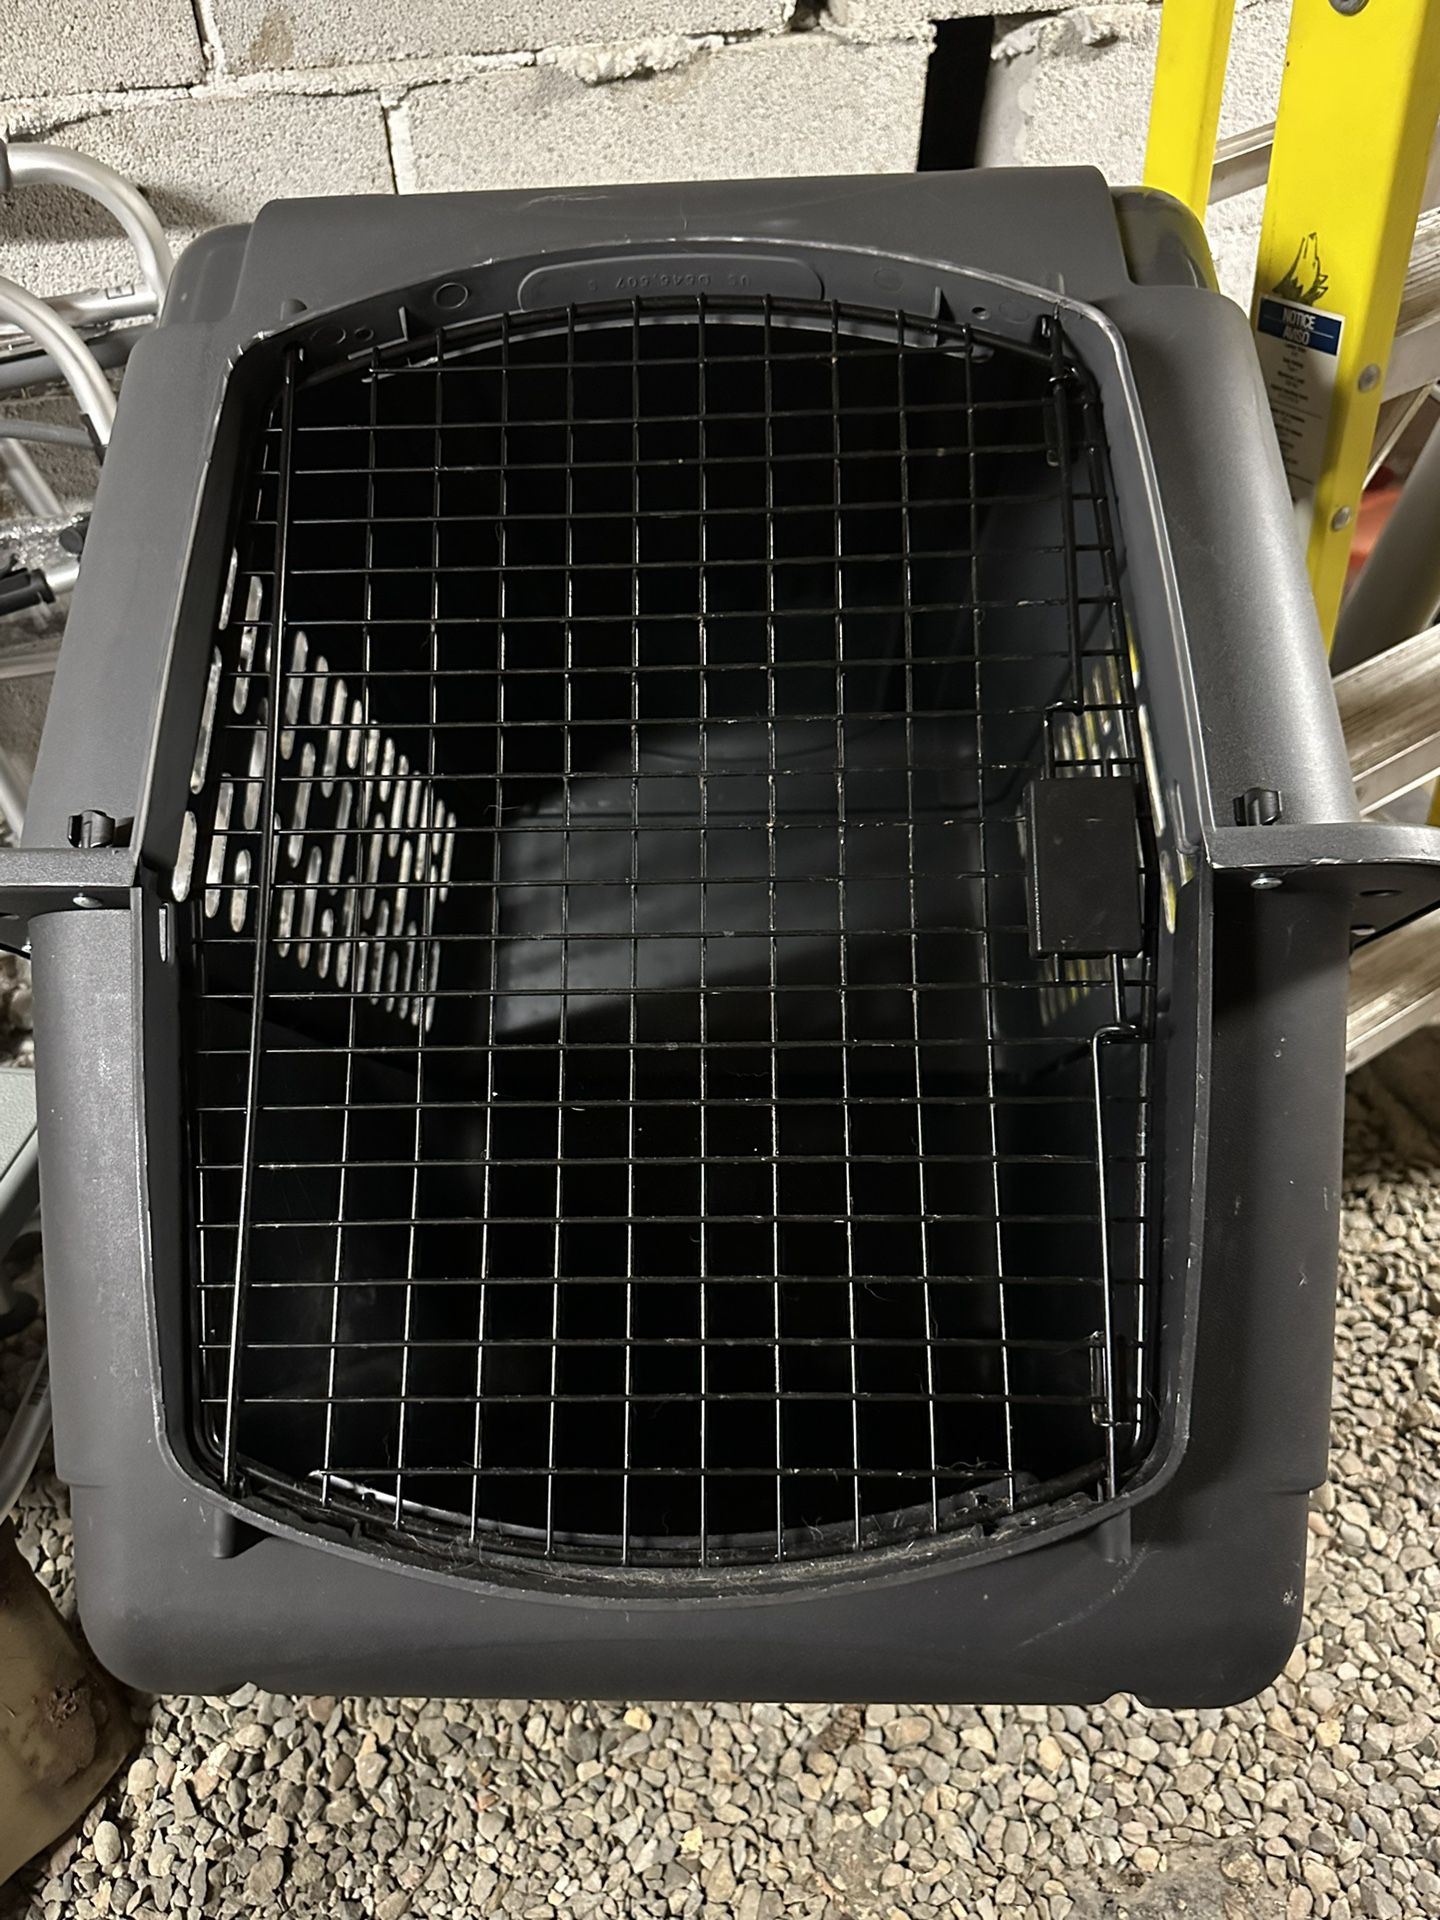 Large Dog Crate Fit Our 70lb Lab 